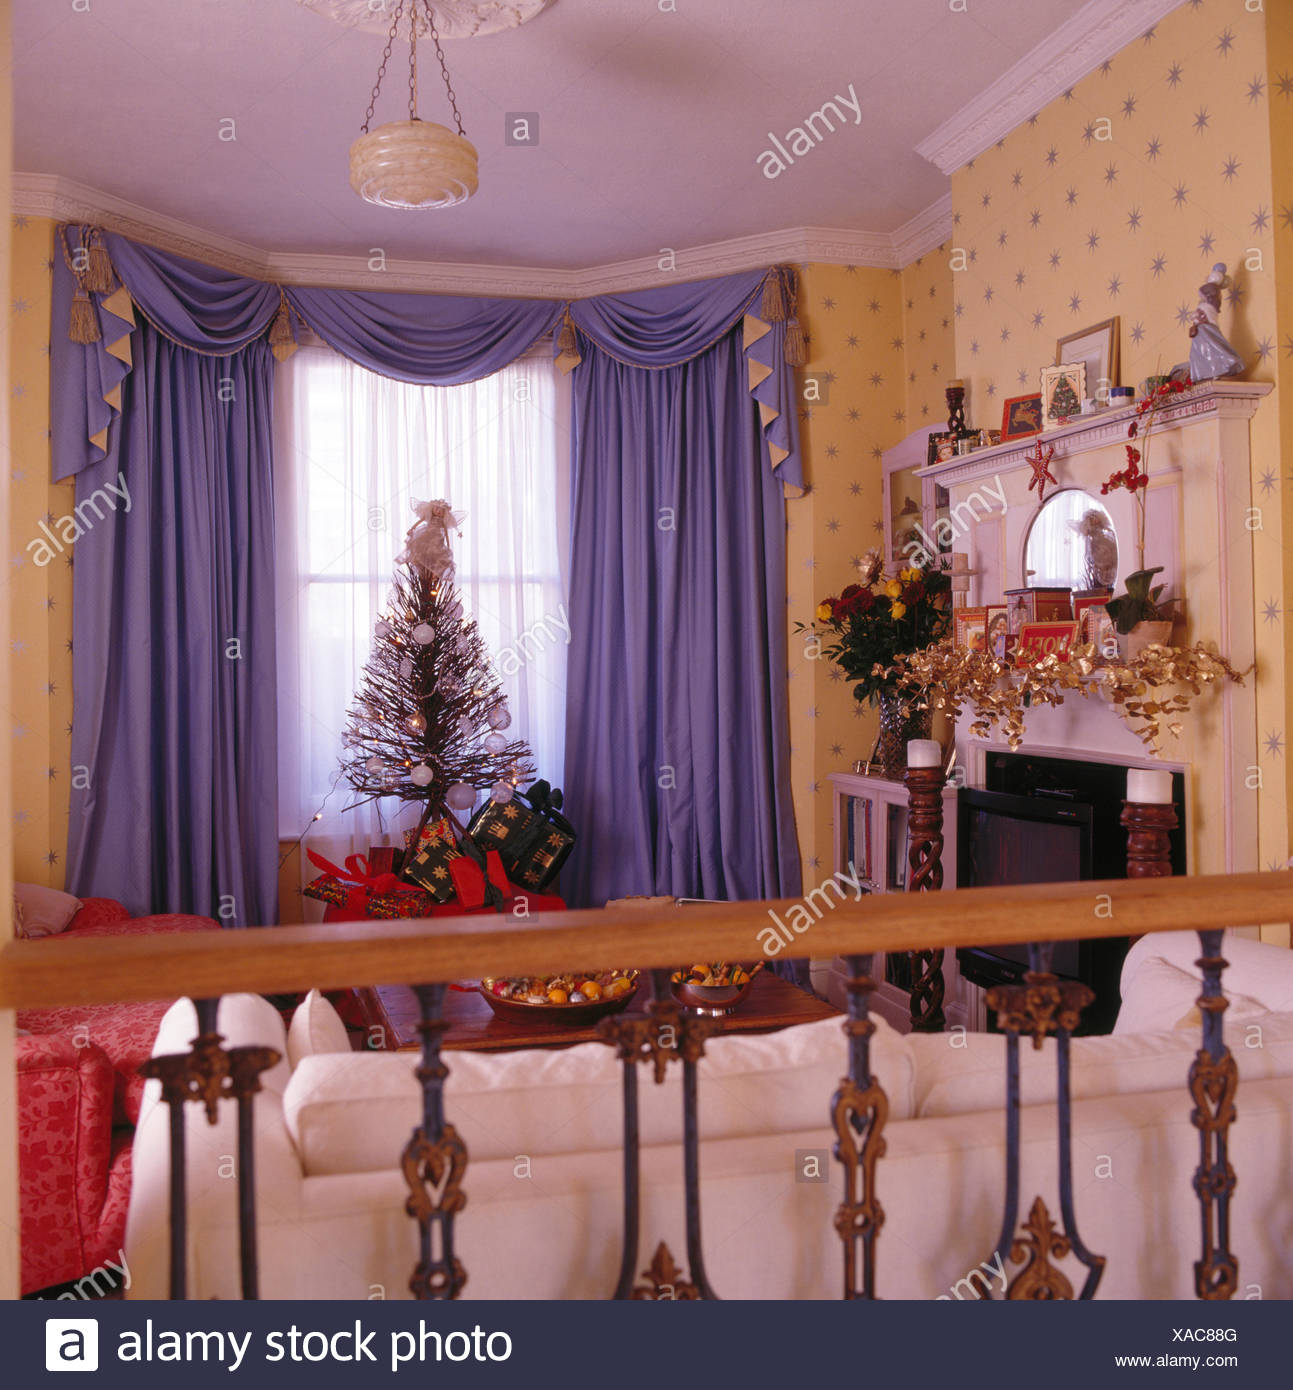 Purple Swagged And Tailed Curtains In Nineties Living Room Decorated For Christmas Stock Photo Alamy